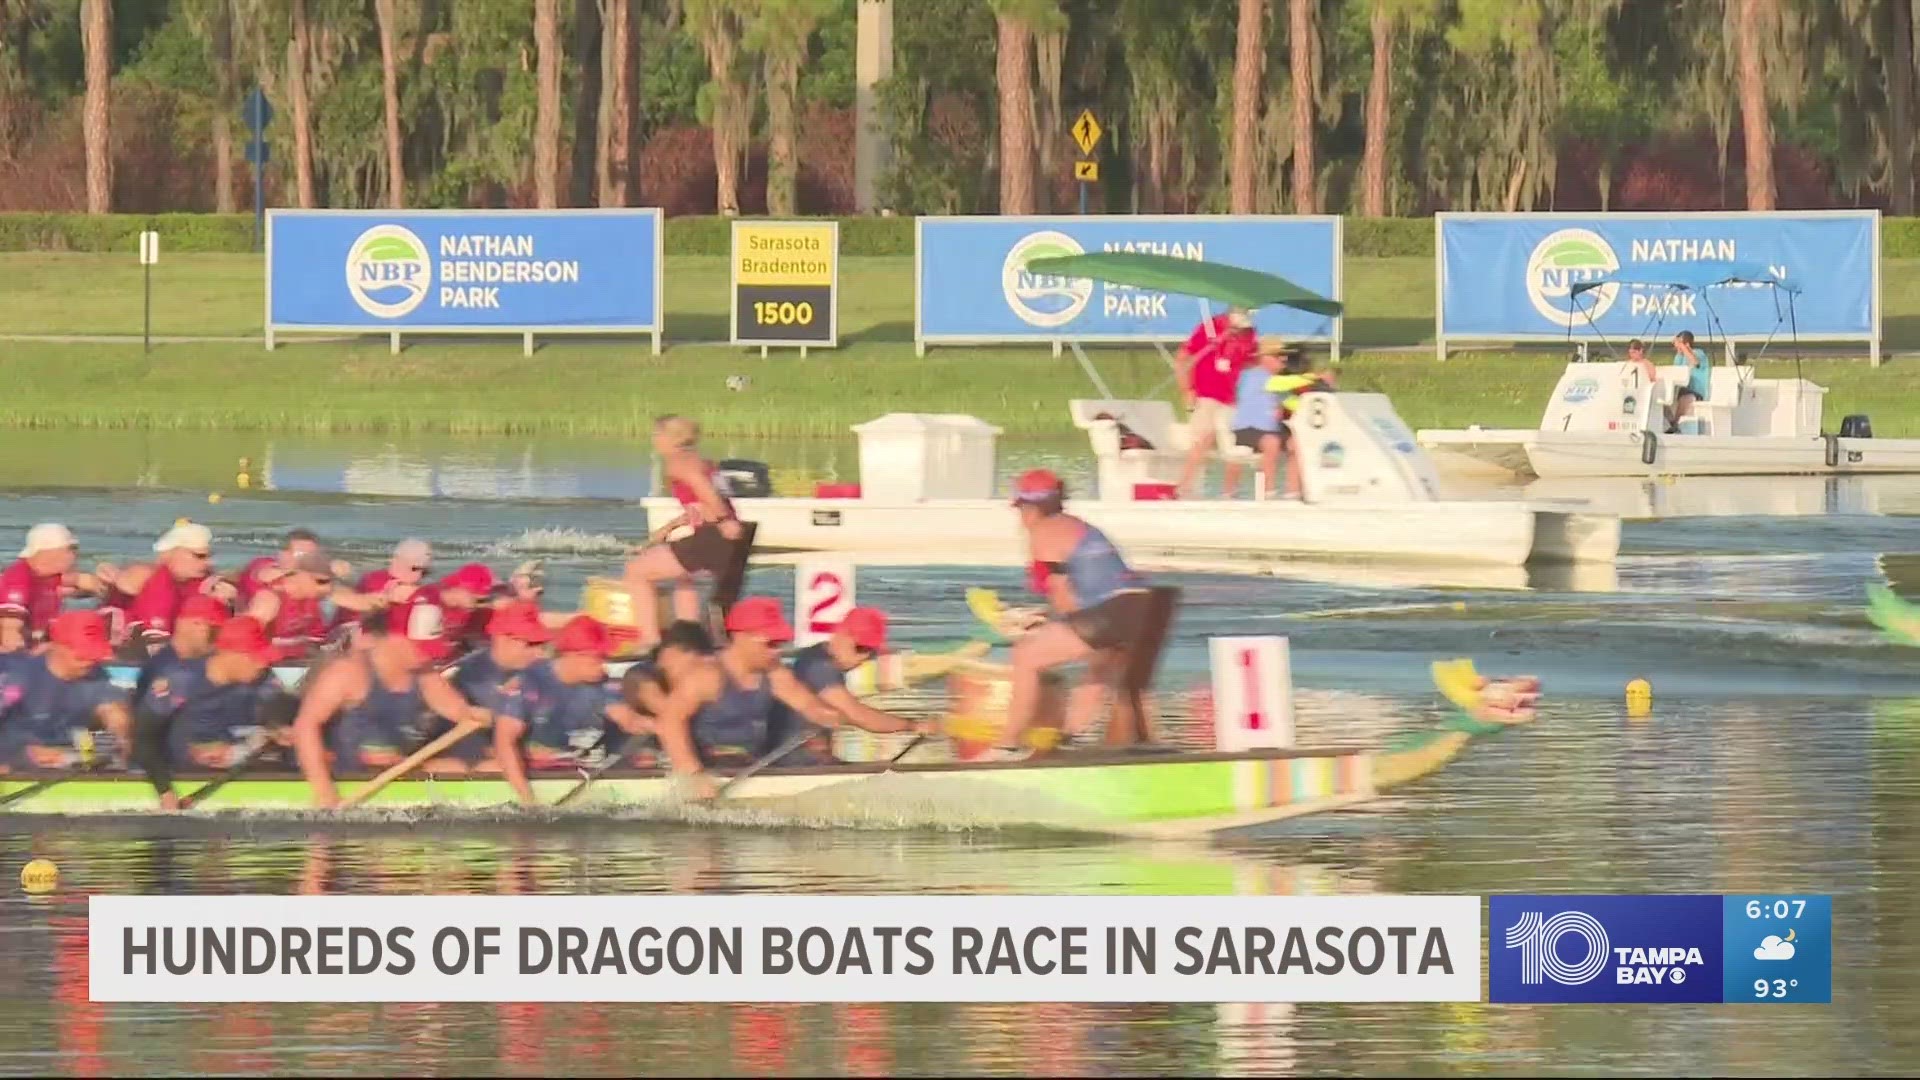 Teams from all over the country raced dragon boats at Nathan Benderson Park in Sarasota.